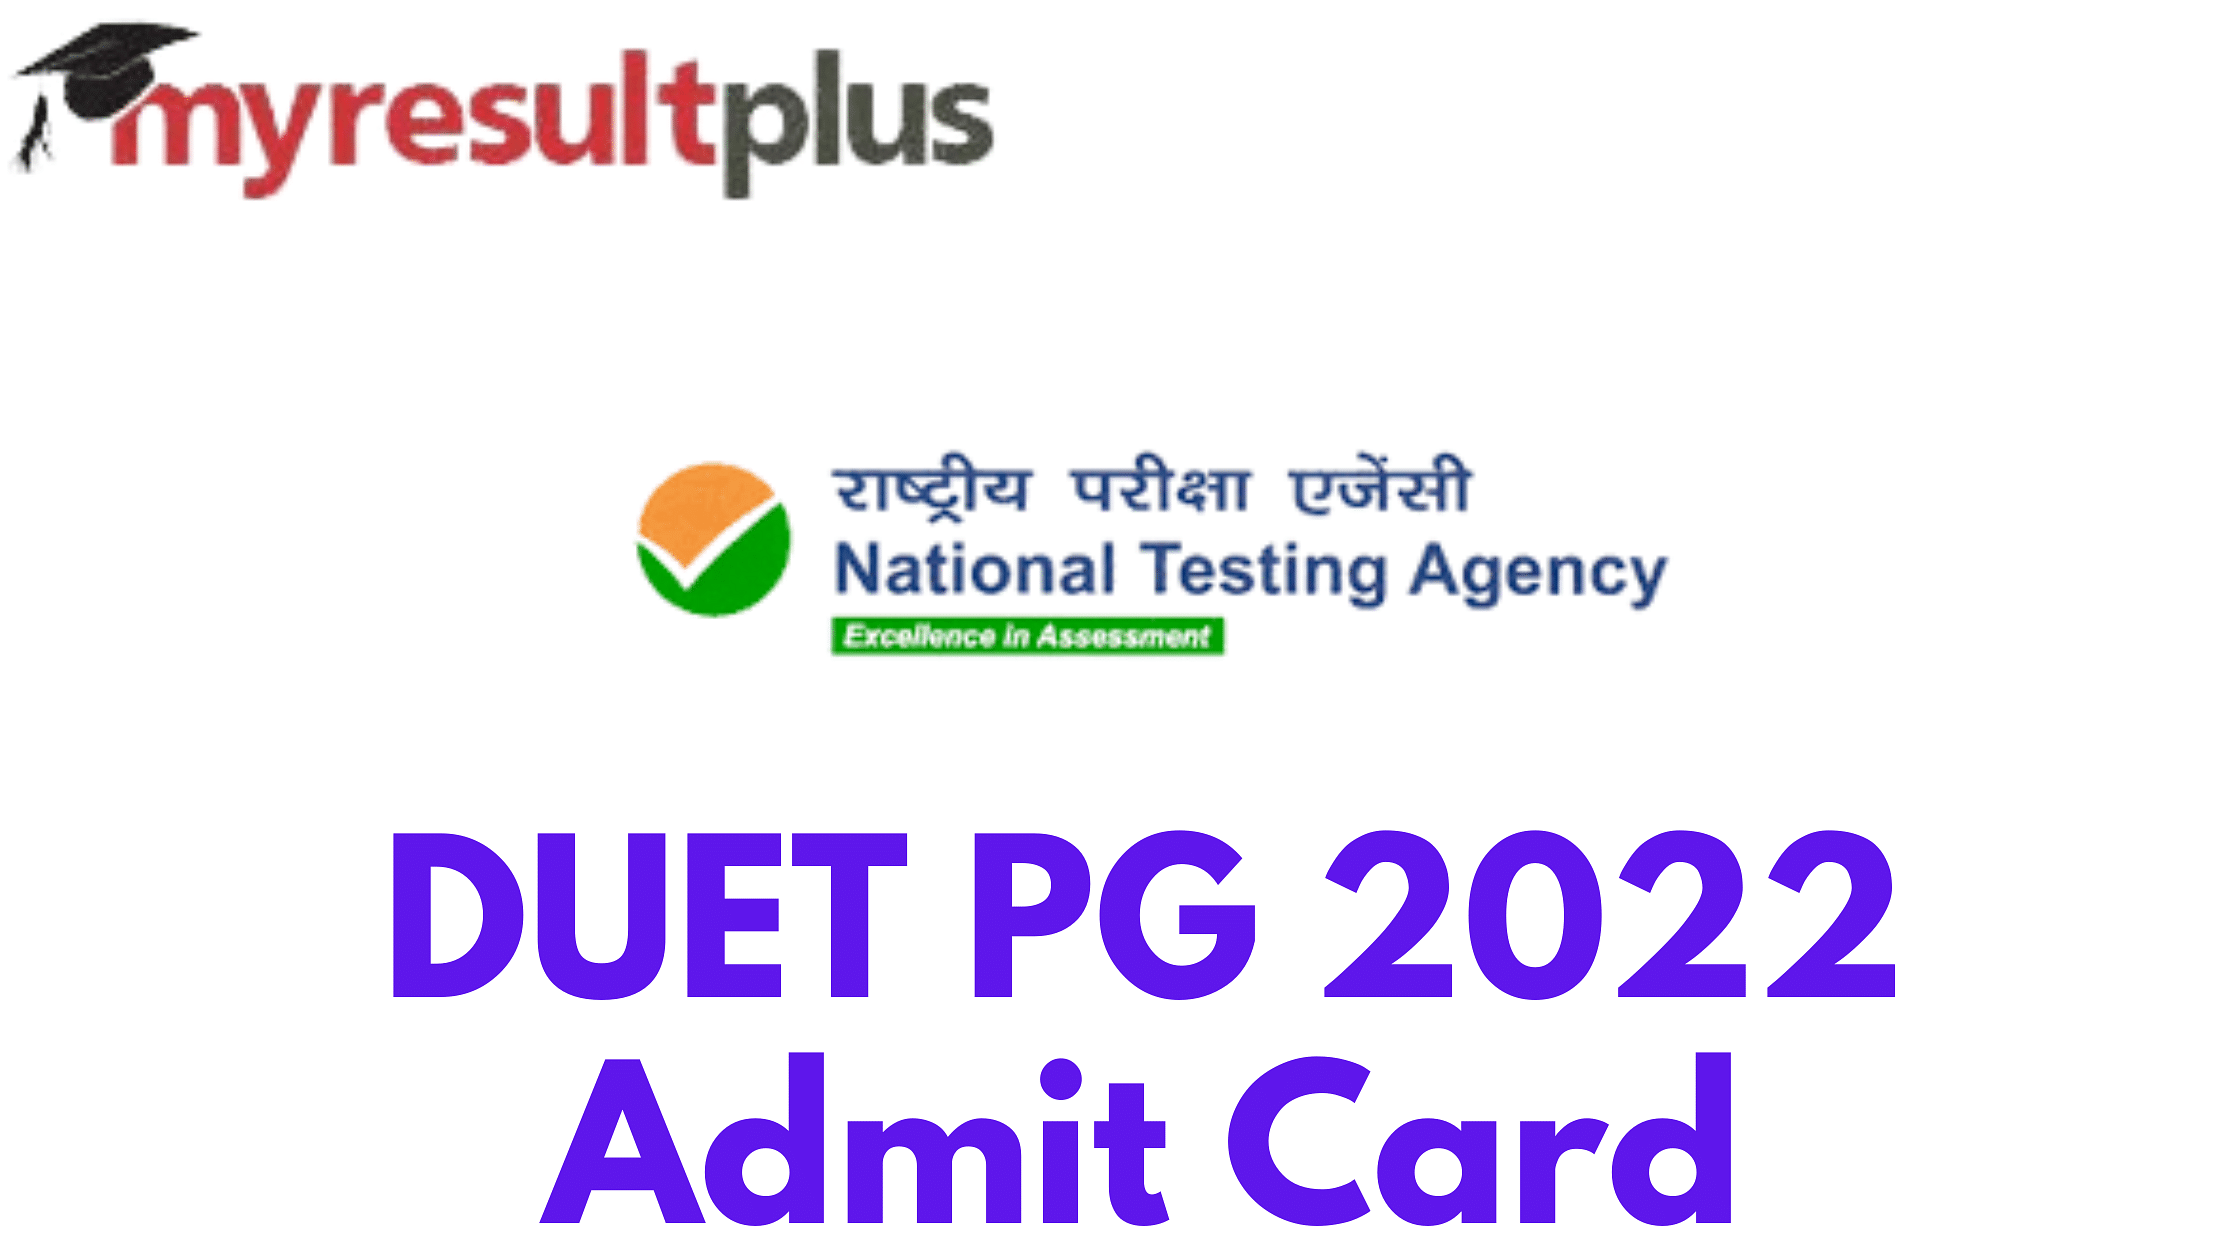 DUET PG 2022 Admit Card Out, Know How to Download Here